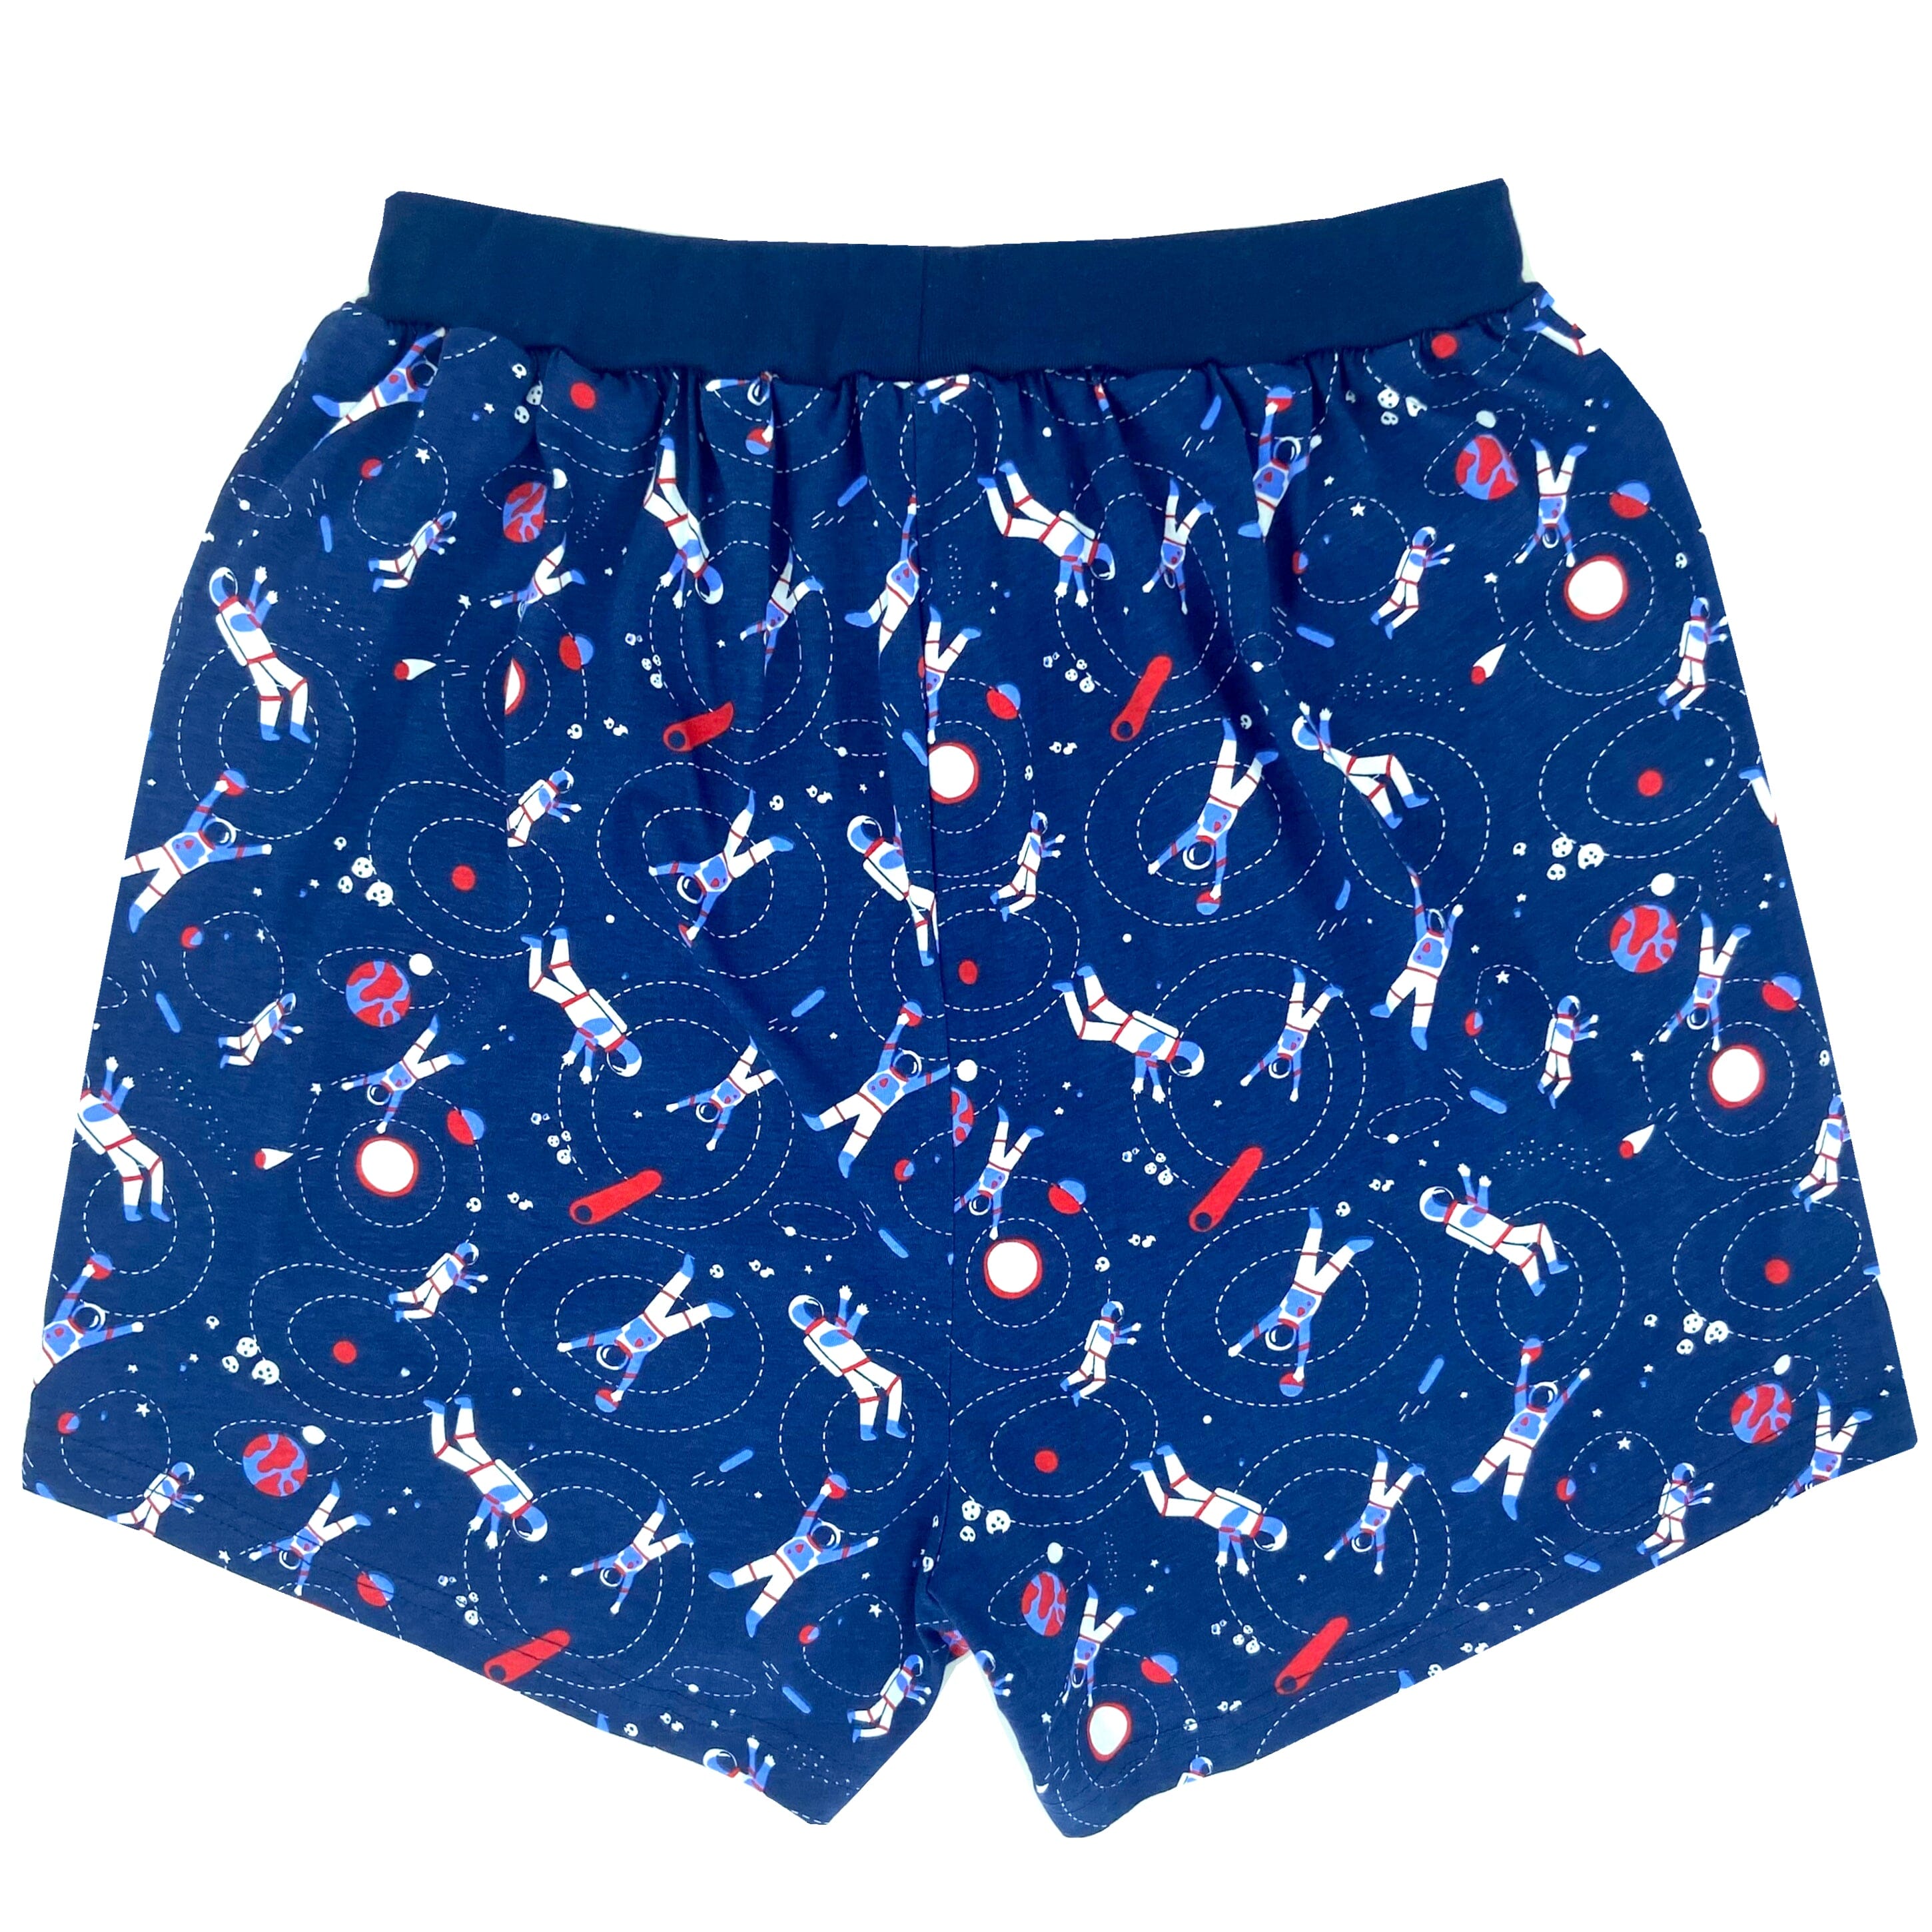 Mens Astronauts in Outer Space Novelty Print Cotton Knit Pajama Shorts